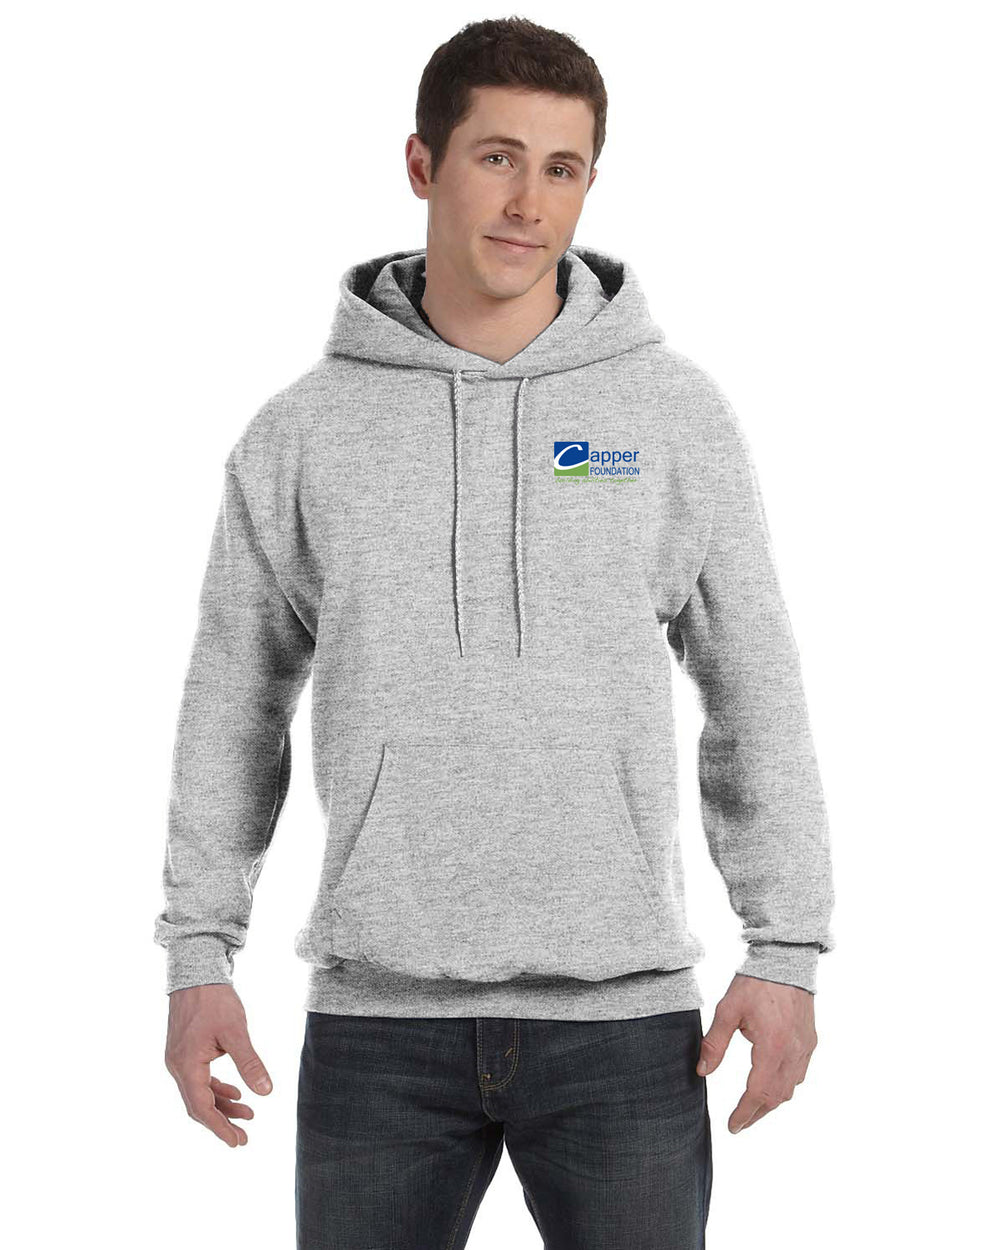 Capper Foundation CC - Adult 7.8 oz. 50/50 Pullover Hoodie - P170